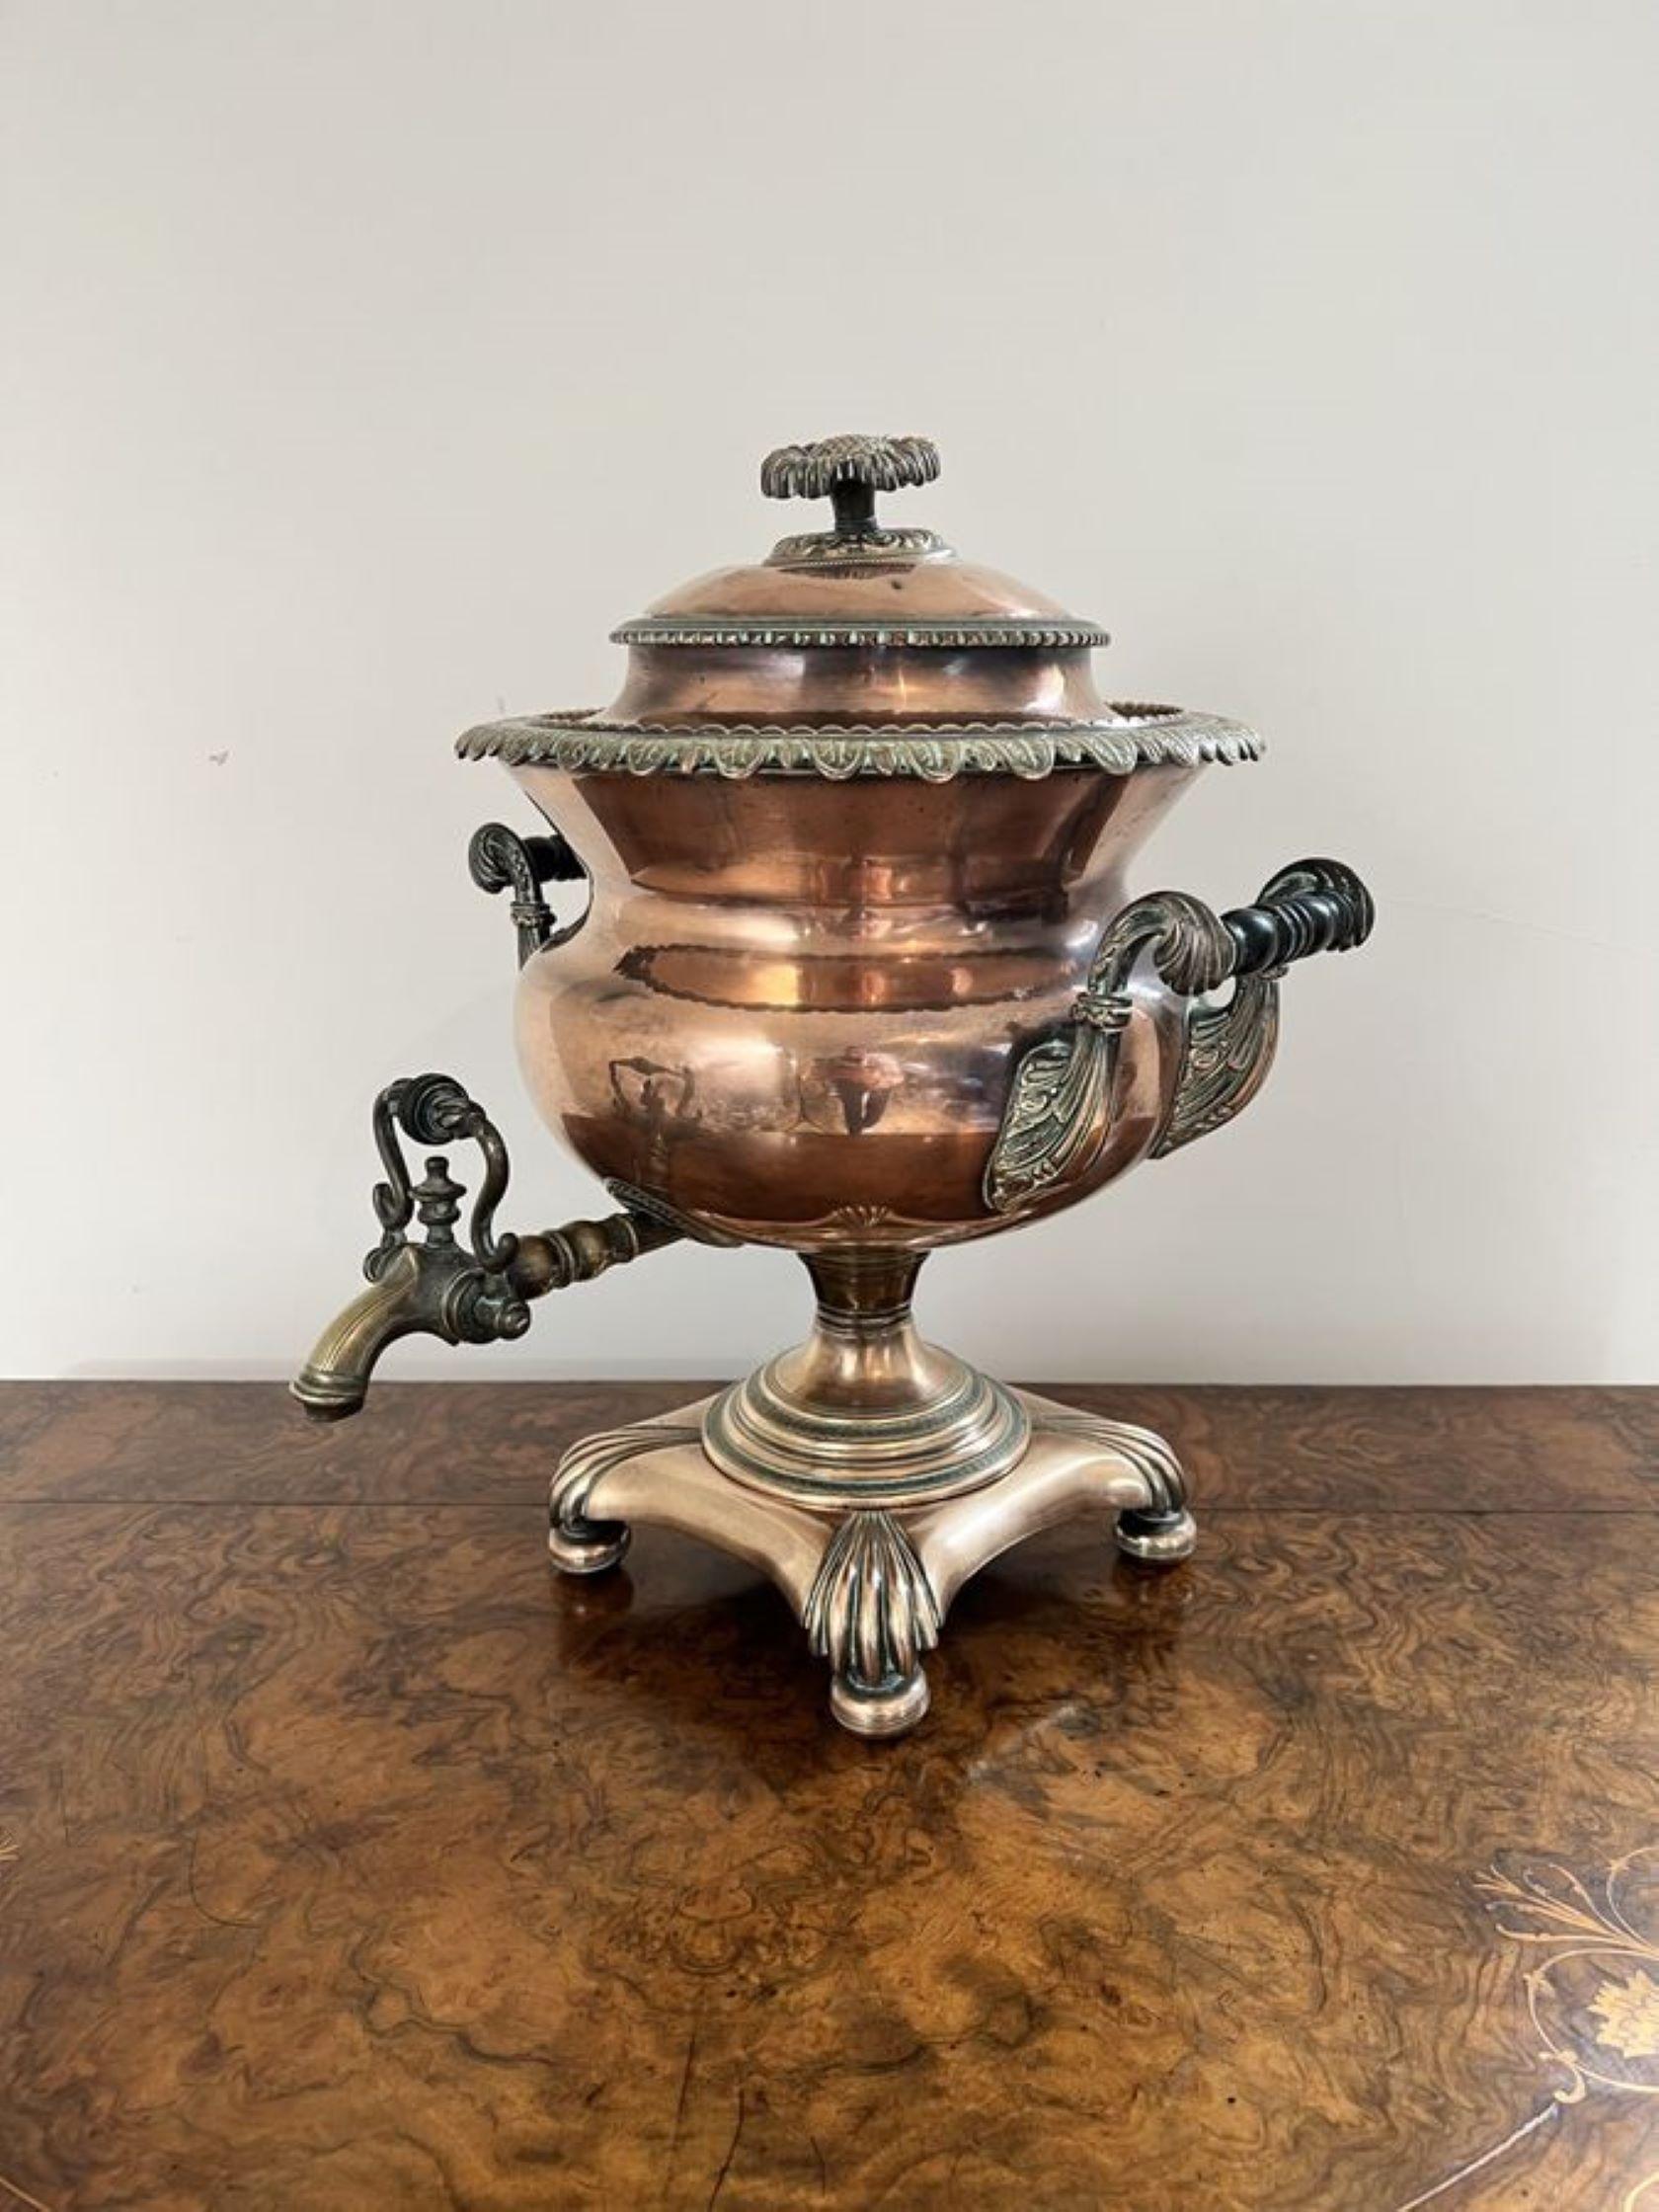 Fantastic quality antique Victorian large copper samovar having a fantastic quality antique Victorian large copper samovar with engraved decoration and ornate detailing, with a lift off lid and the original detailed knob with two carrying handles to